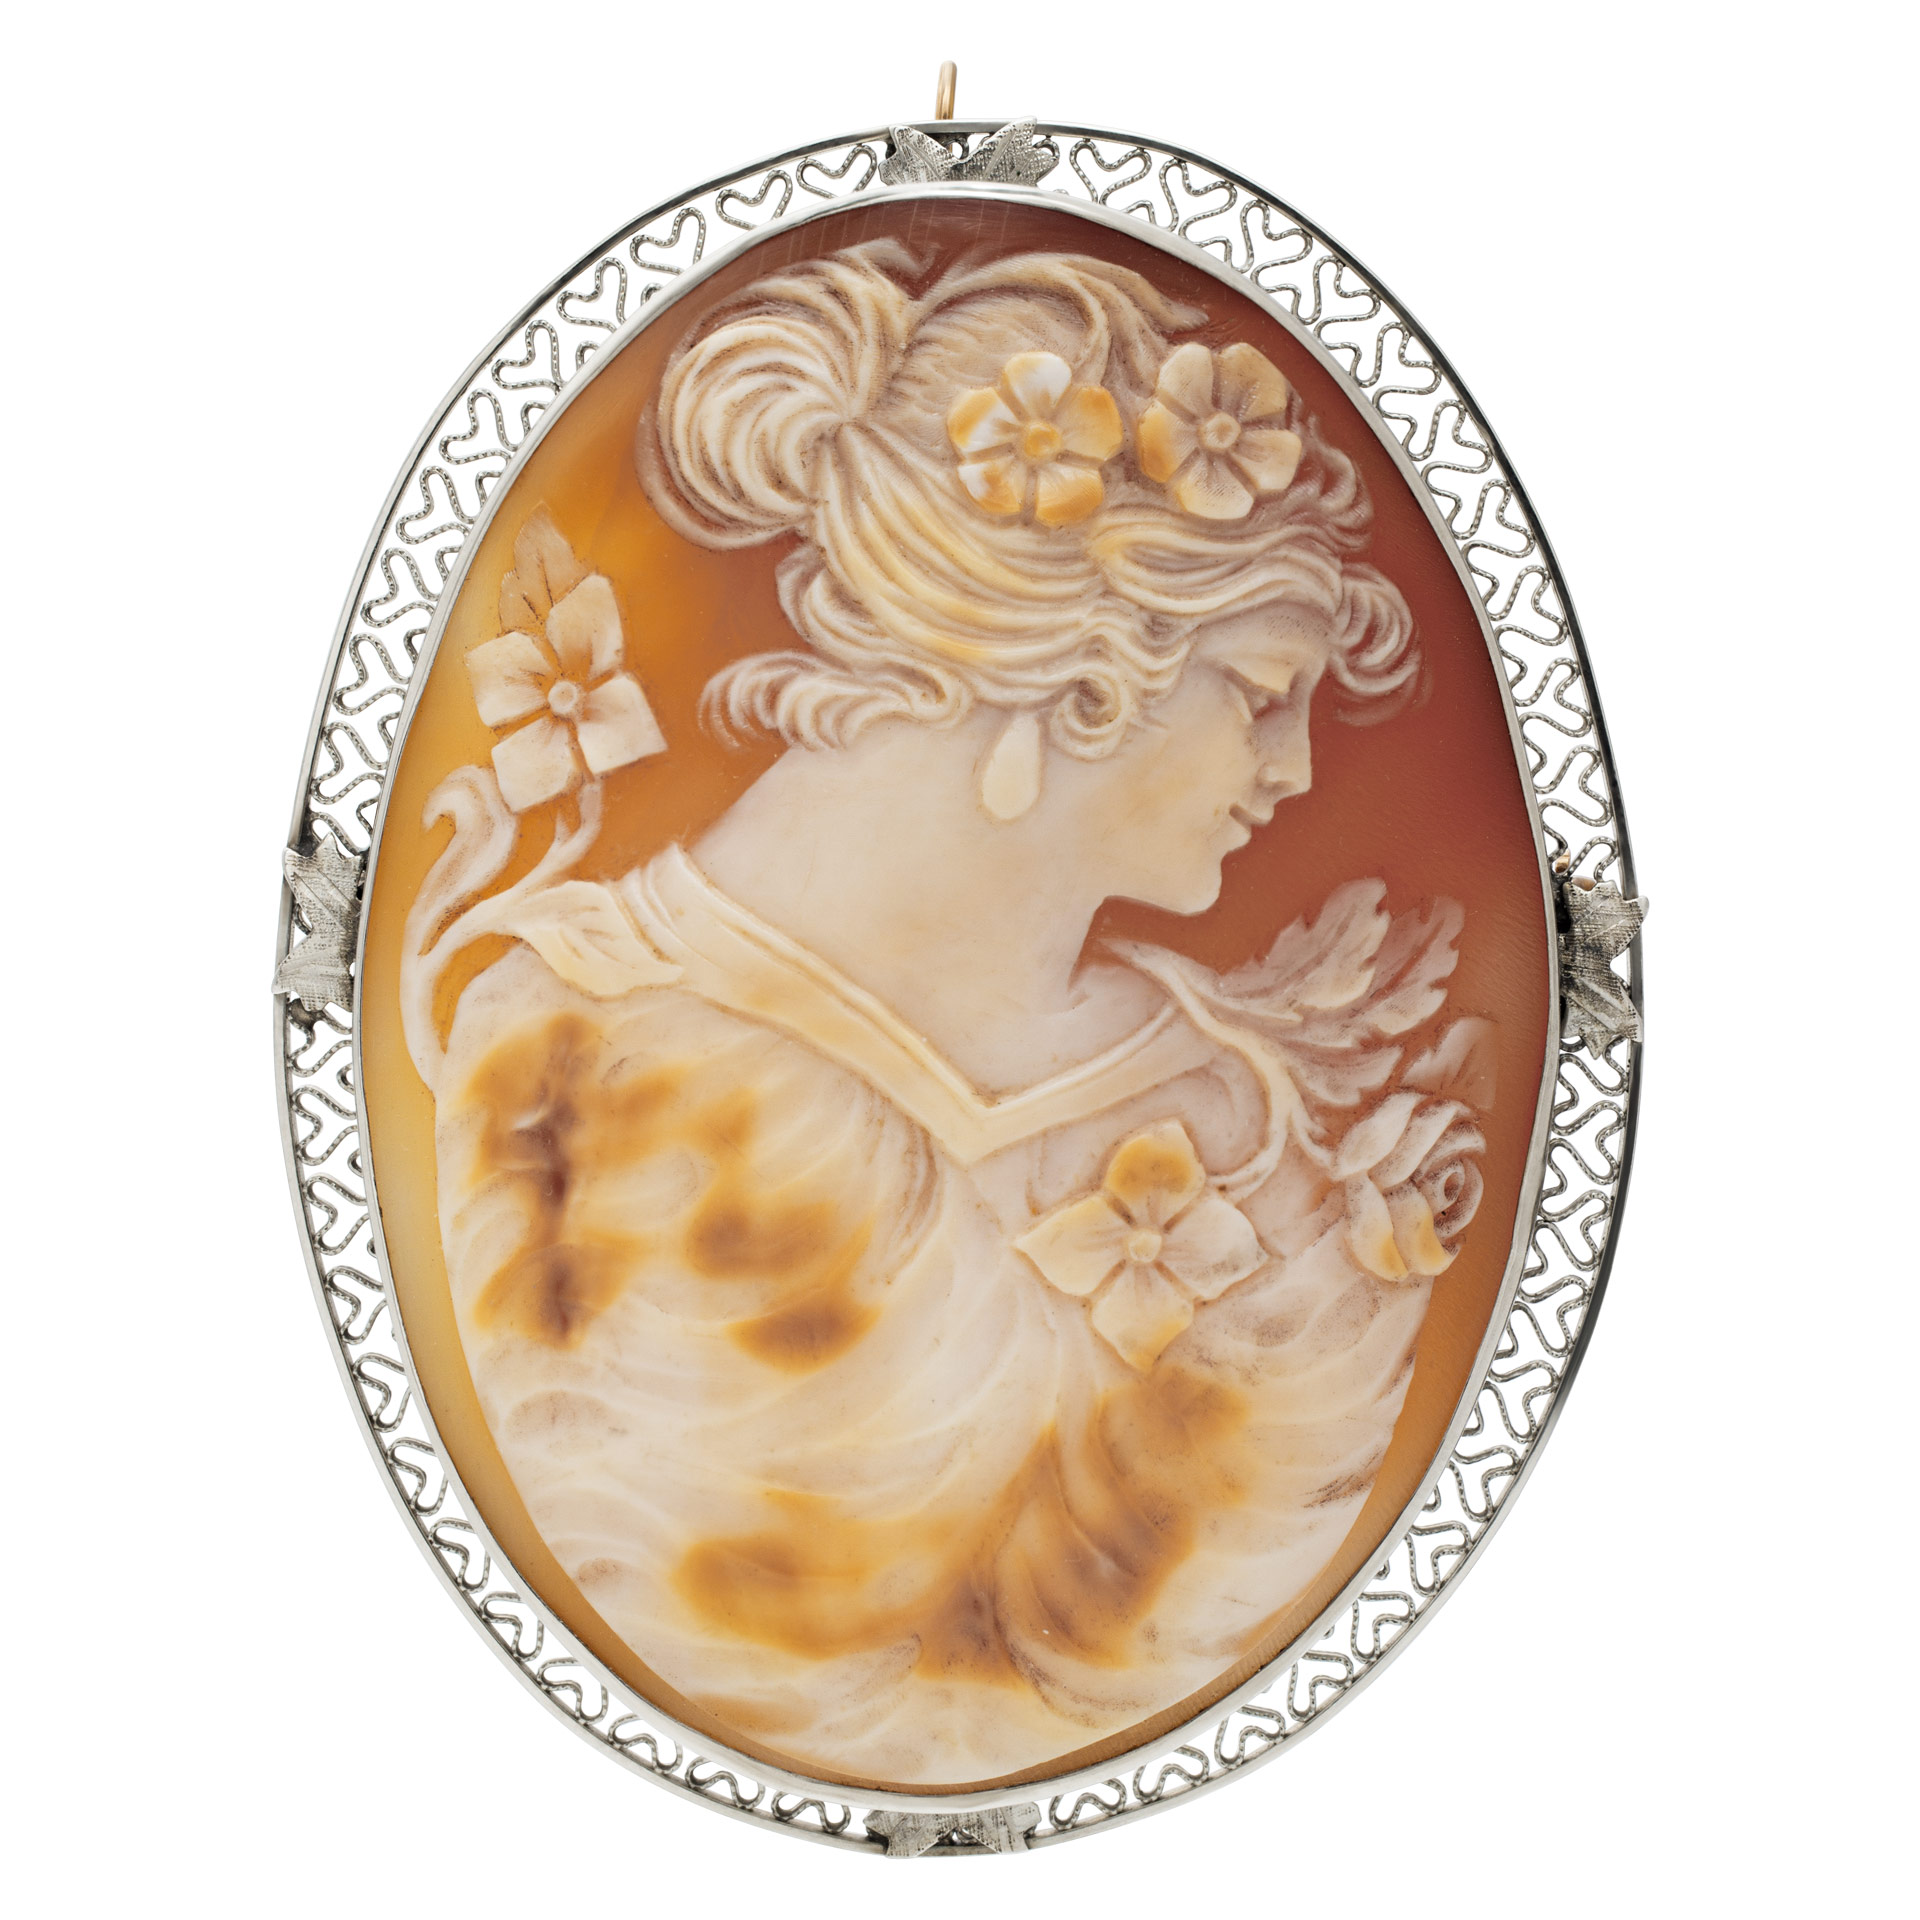 Circa 1900, large Victorian Cameo broach/pendant in 14k white gold filigree frame